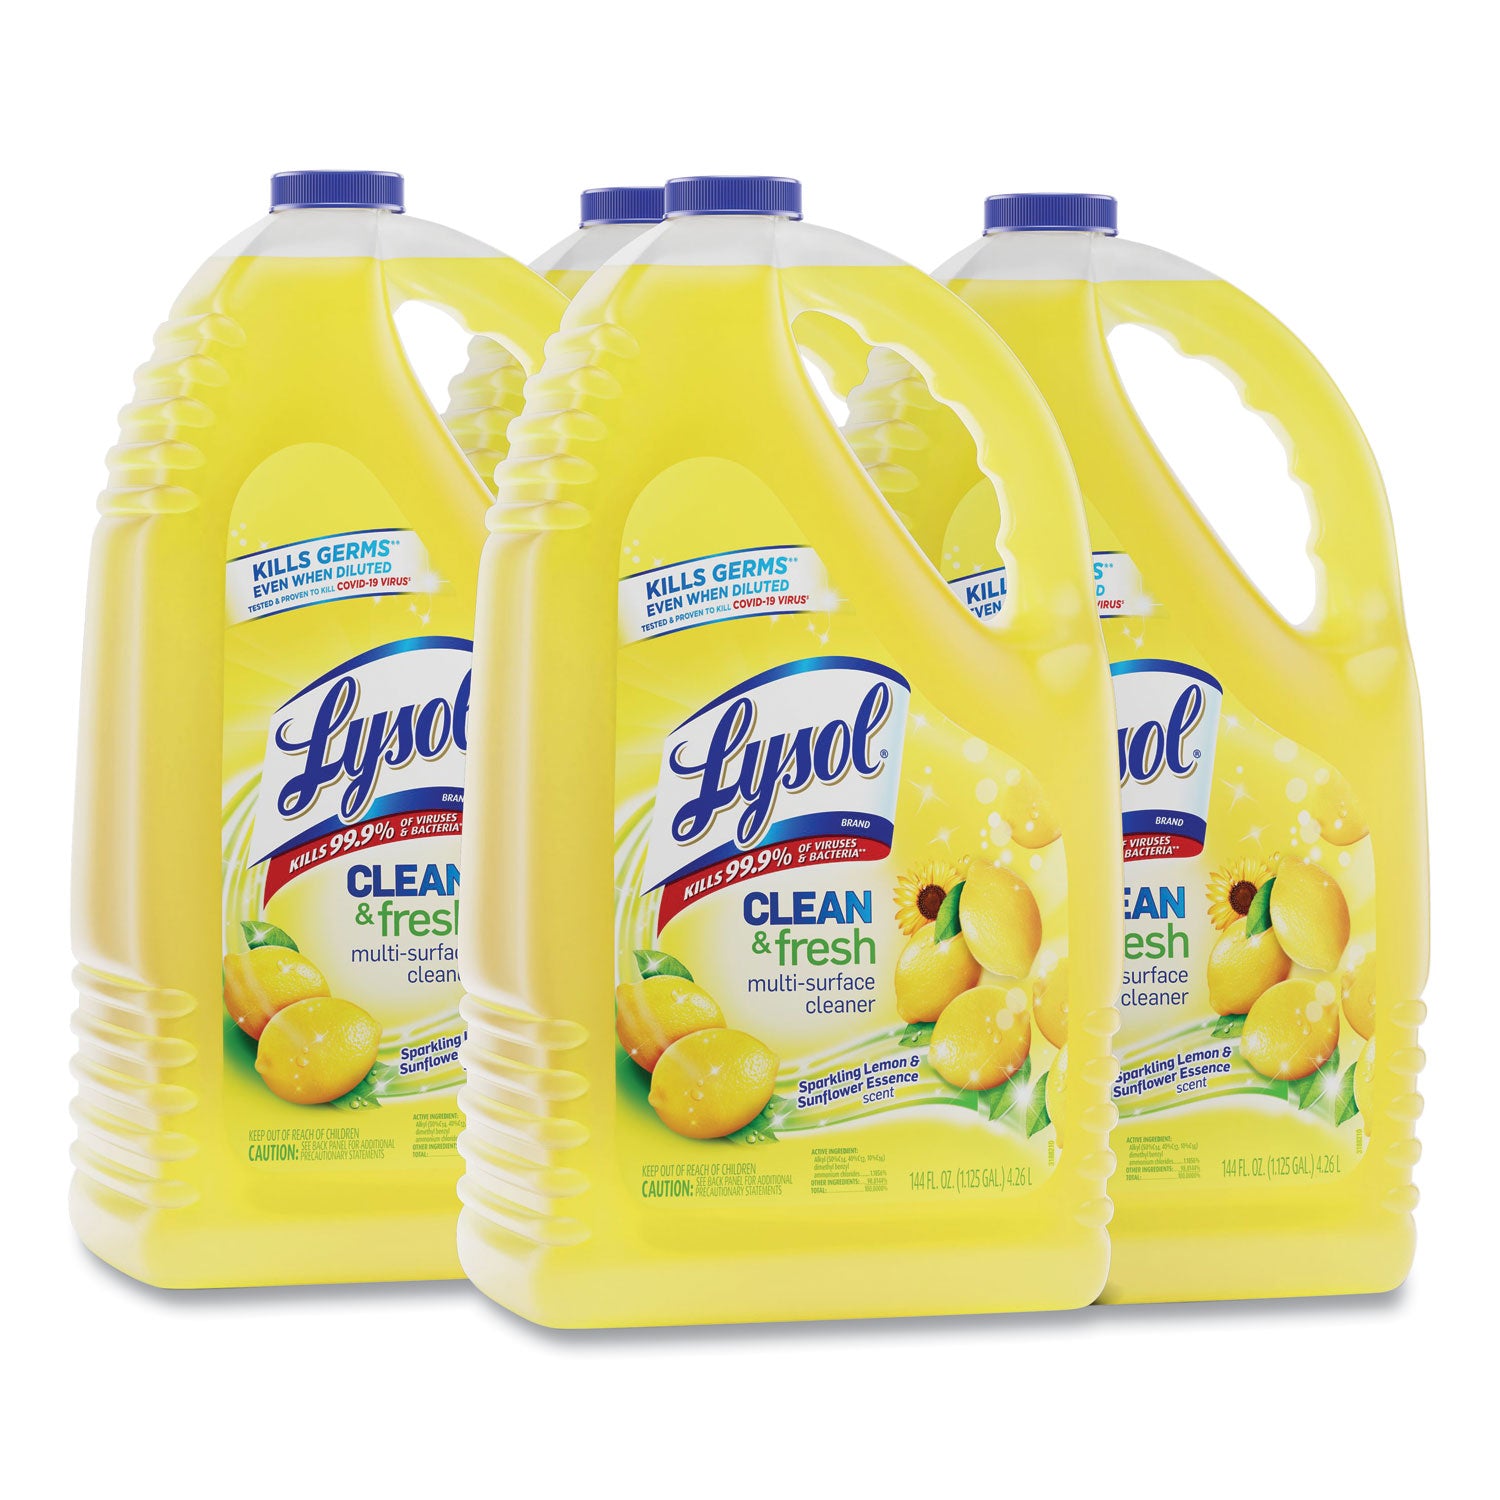 clean-and-fresh-multi-surface-cleaner-sparkling-lemon-and-sunflower-essence-144-oz-bottle_rac77617ea - 2